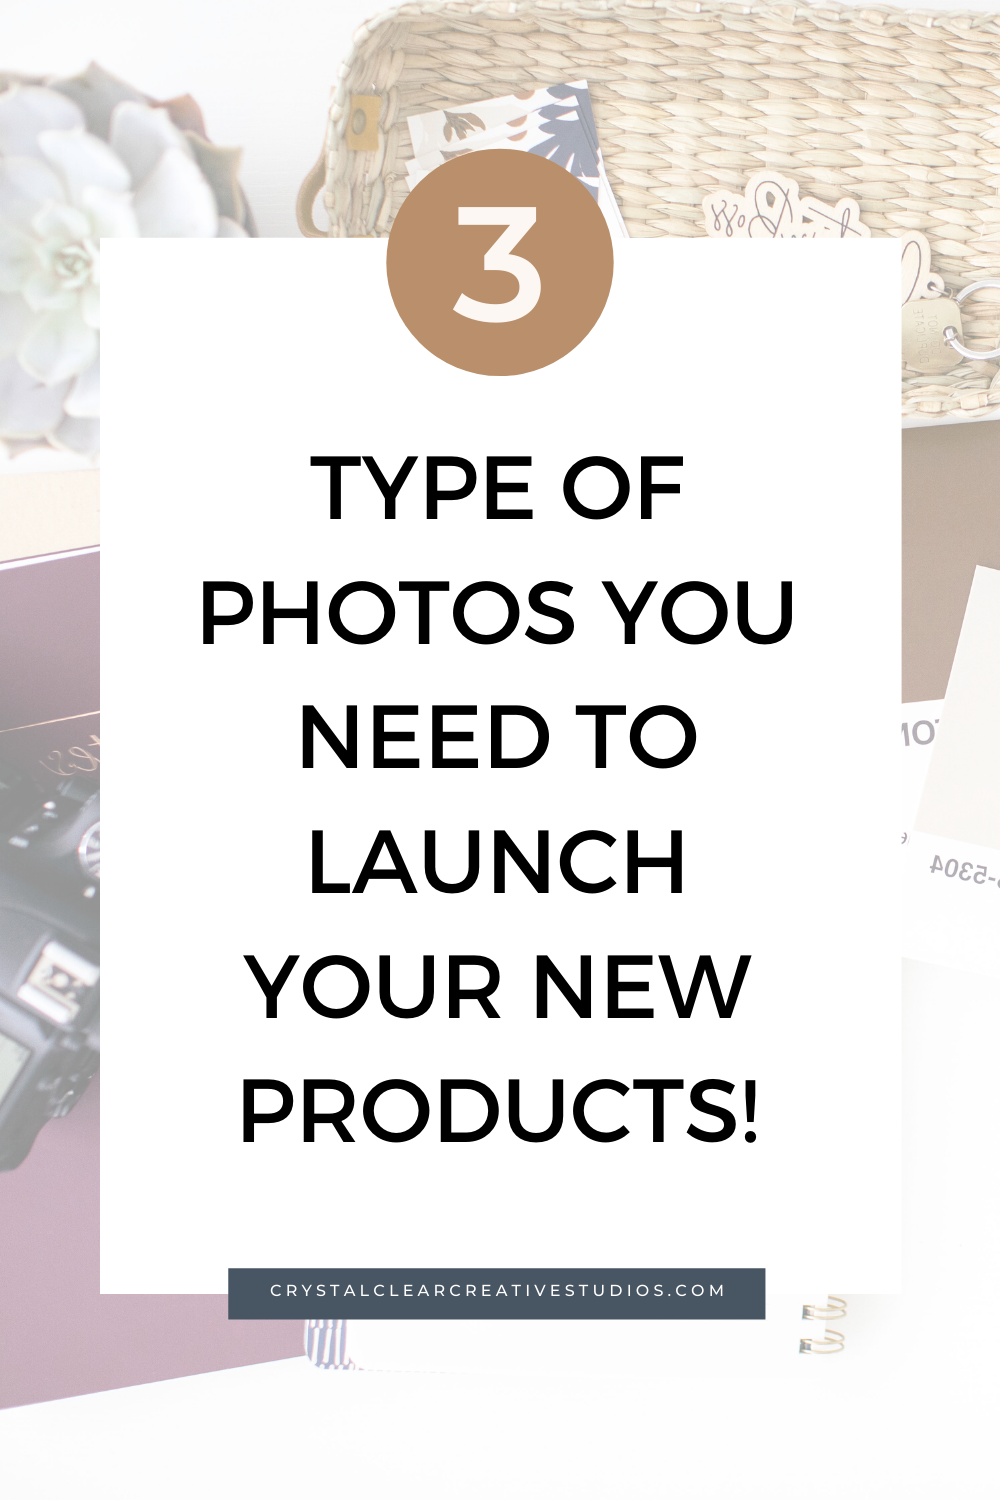 Launching a New Product? Here's 3 Types of Photos You Need!